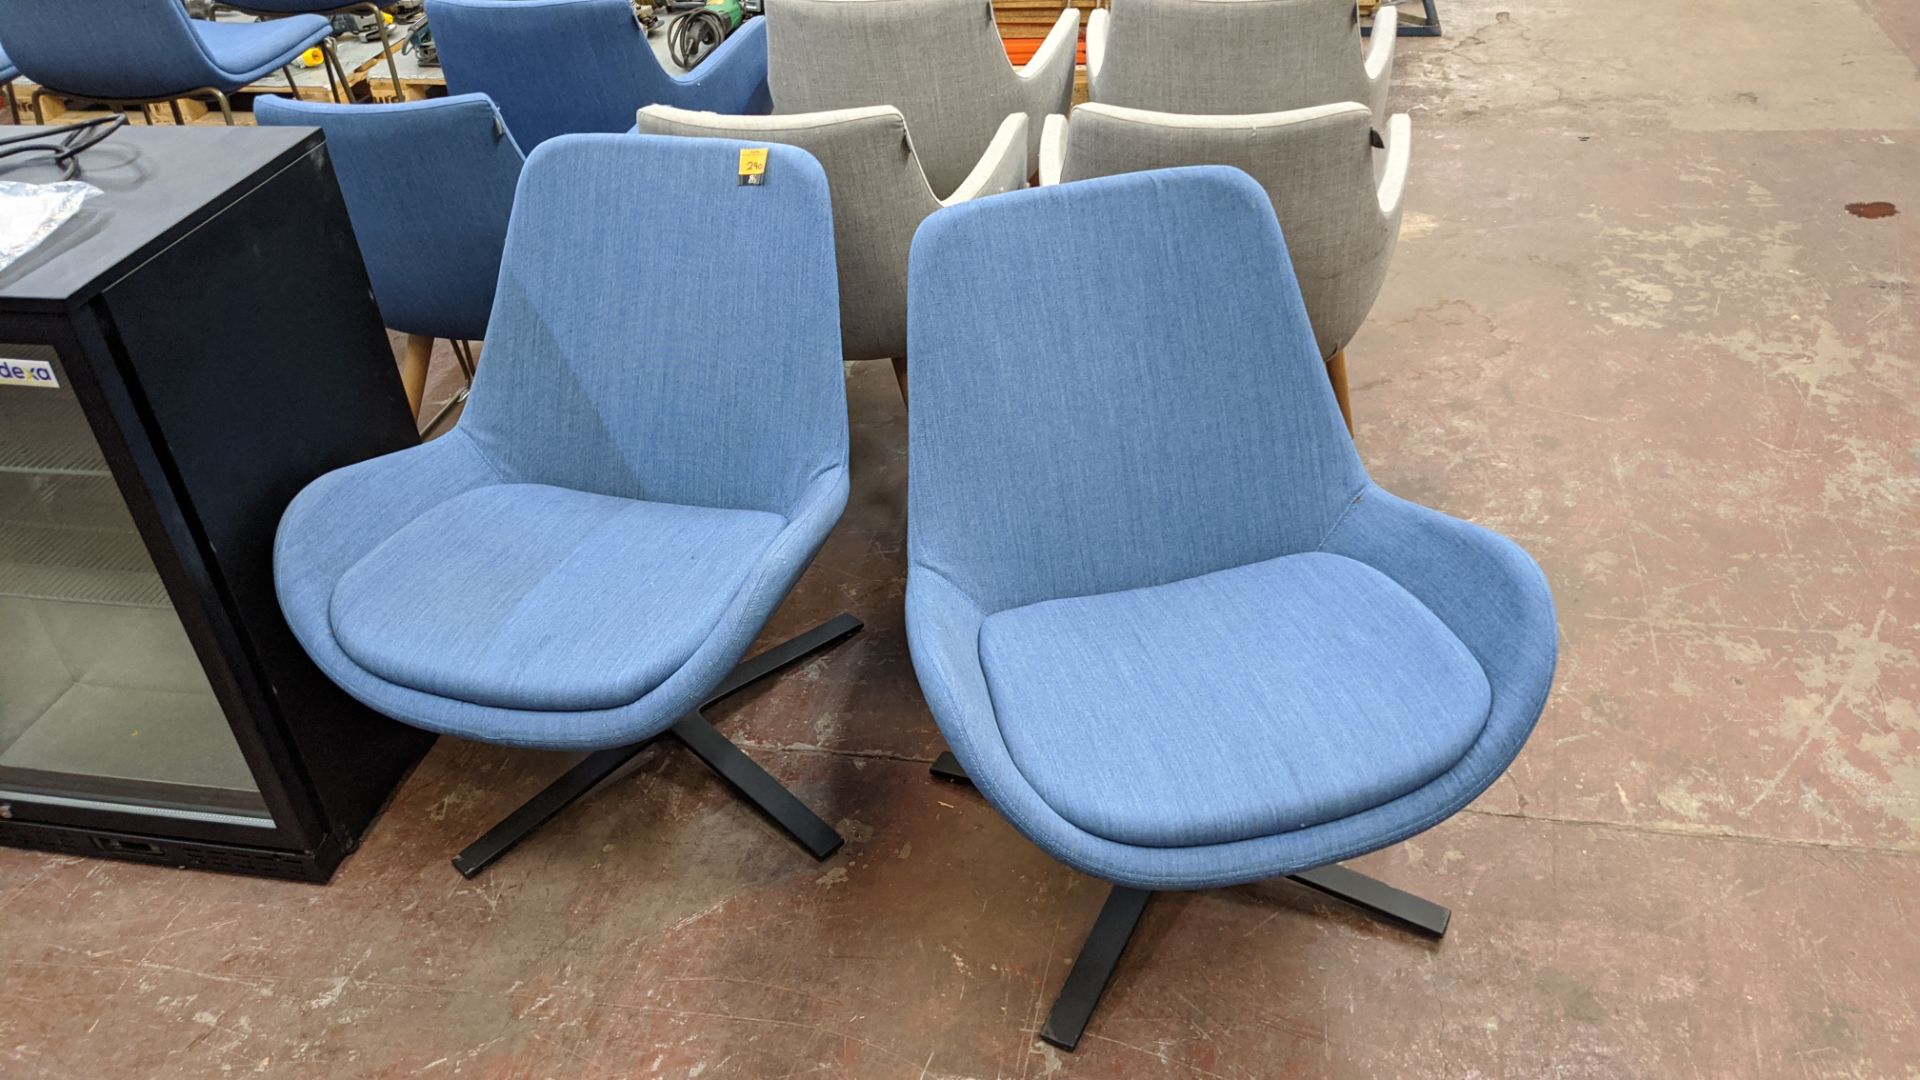 Pair of blue fabric upholstered swivel chairs NB. The fabric appears to match that used for lots 29